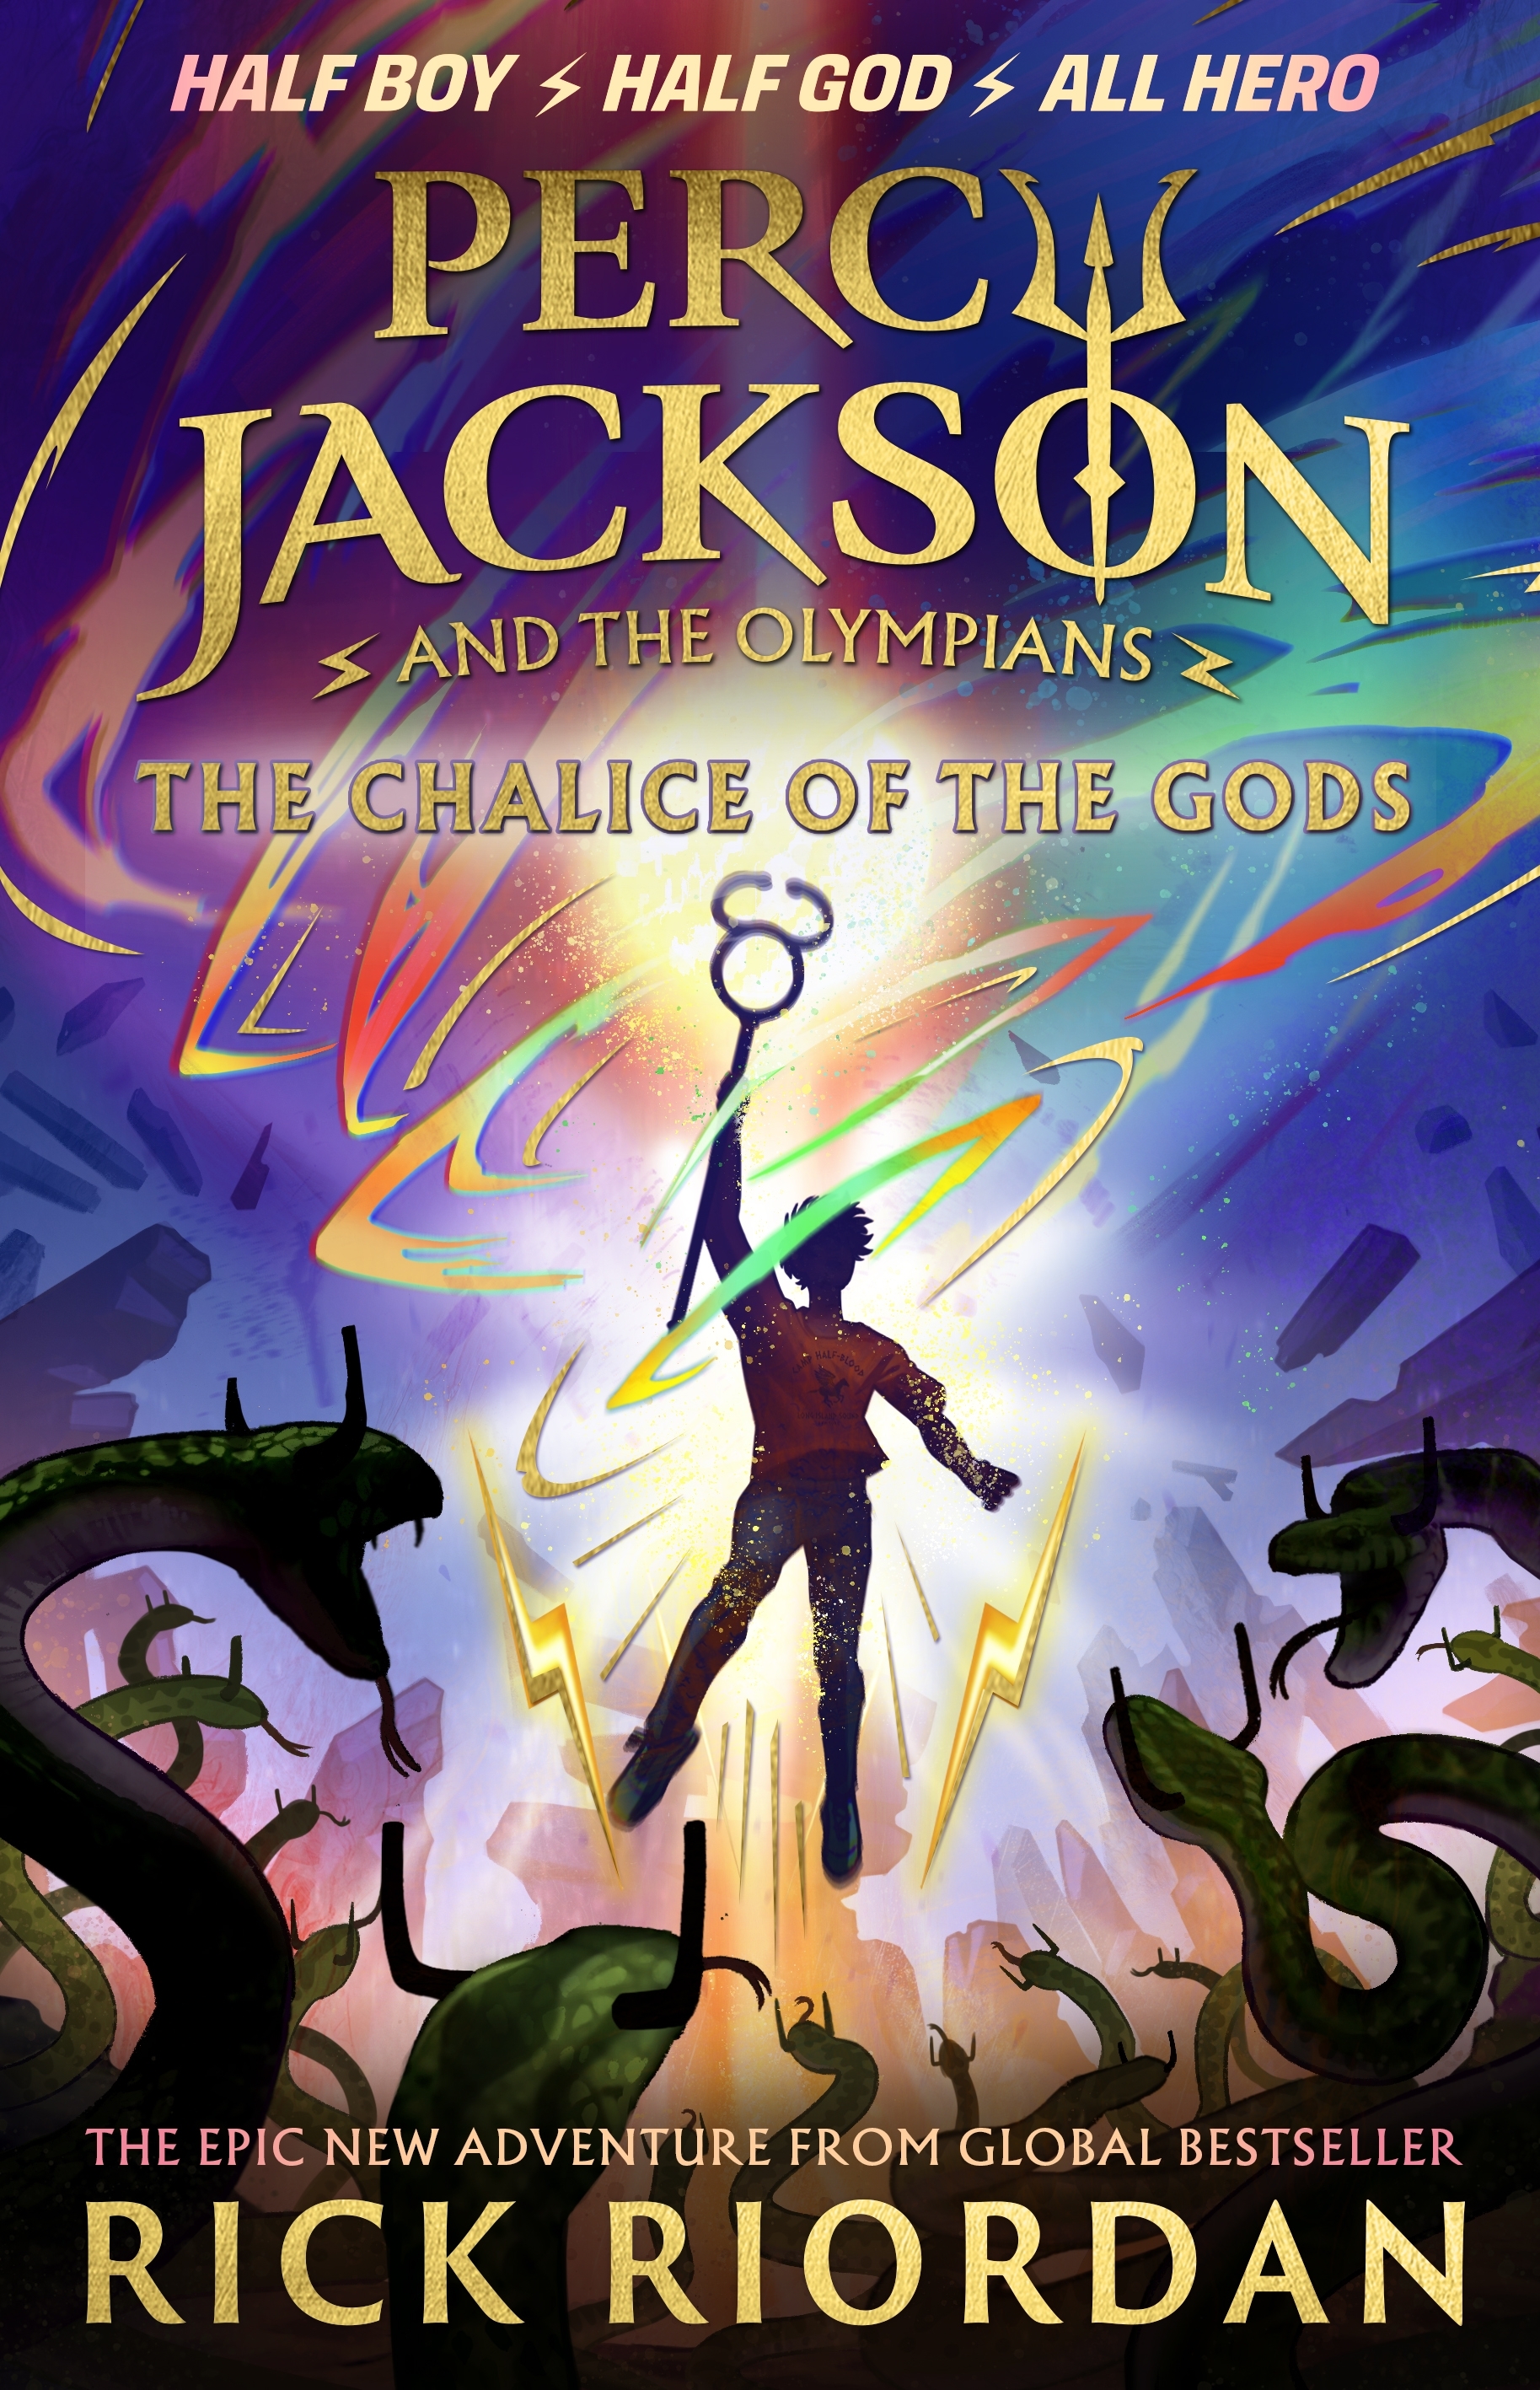 Publisher:Penguin - Percy Jackson and the Olympians:The Chalice of the Gods - Rick Riordan